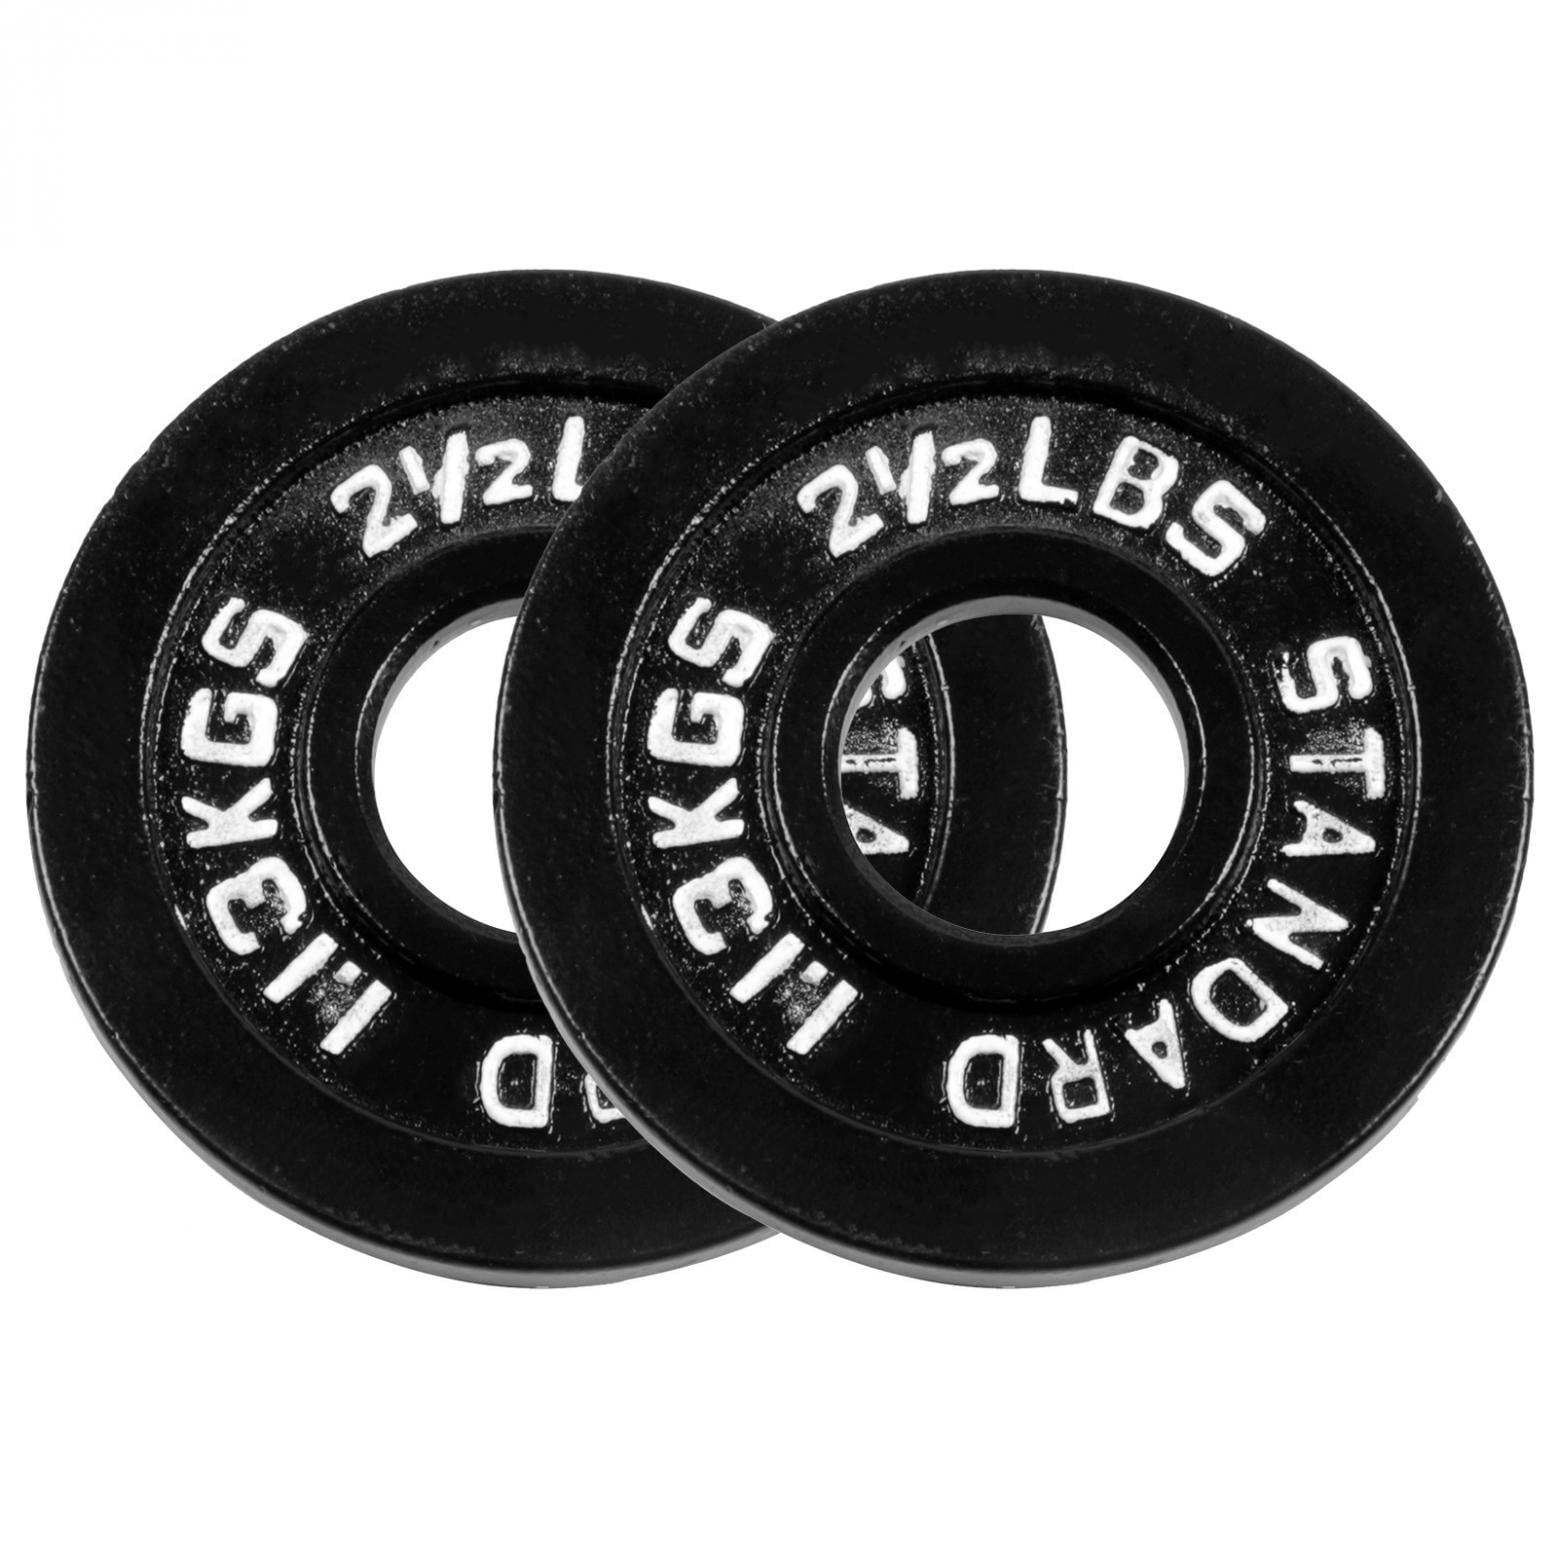 OASIS SPORT Pair Bumper Plate Weight Plate with 2-inch Steel Hub for Strength Training & Weightlifting 